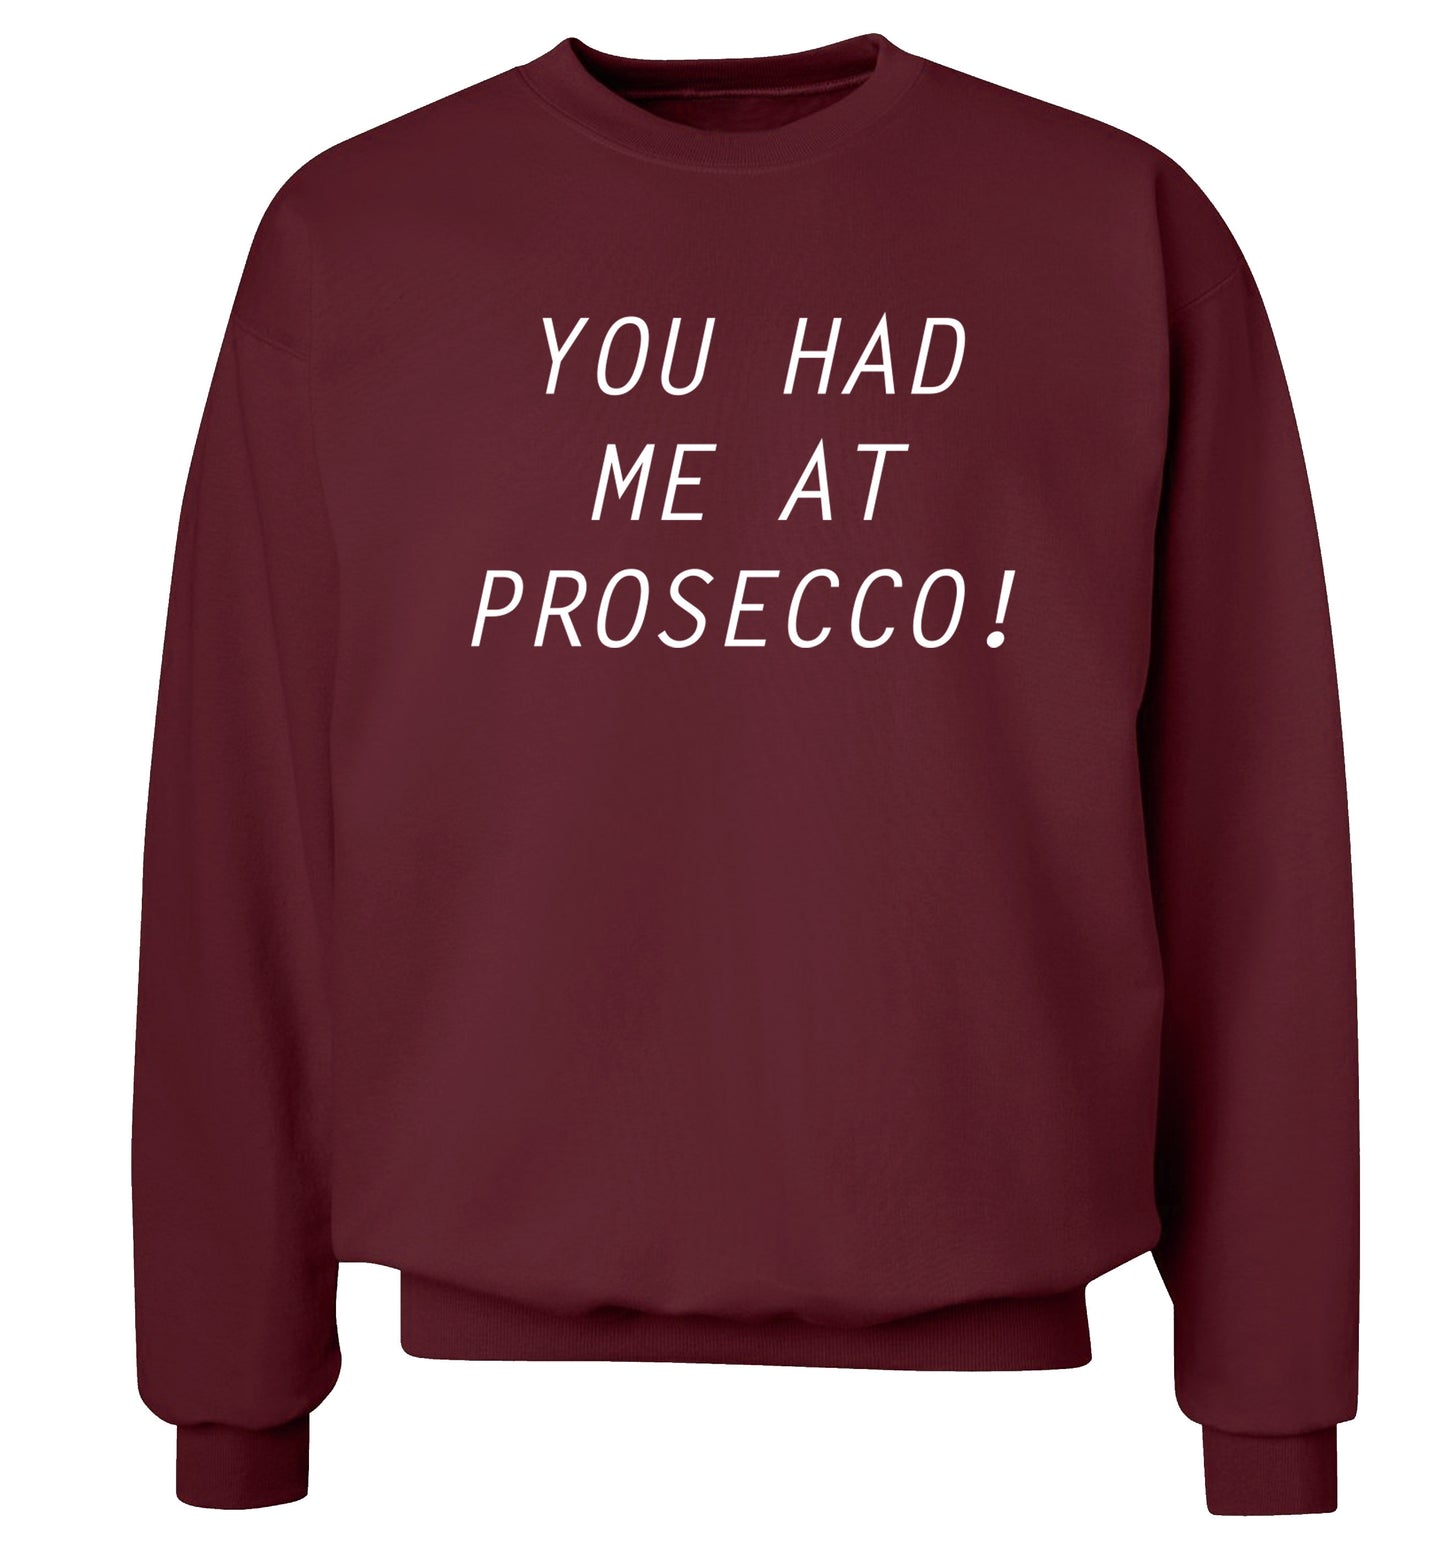 You had me at prosecco Adult's unisex maroon Sweater 2XL